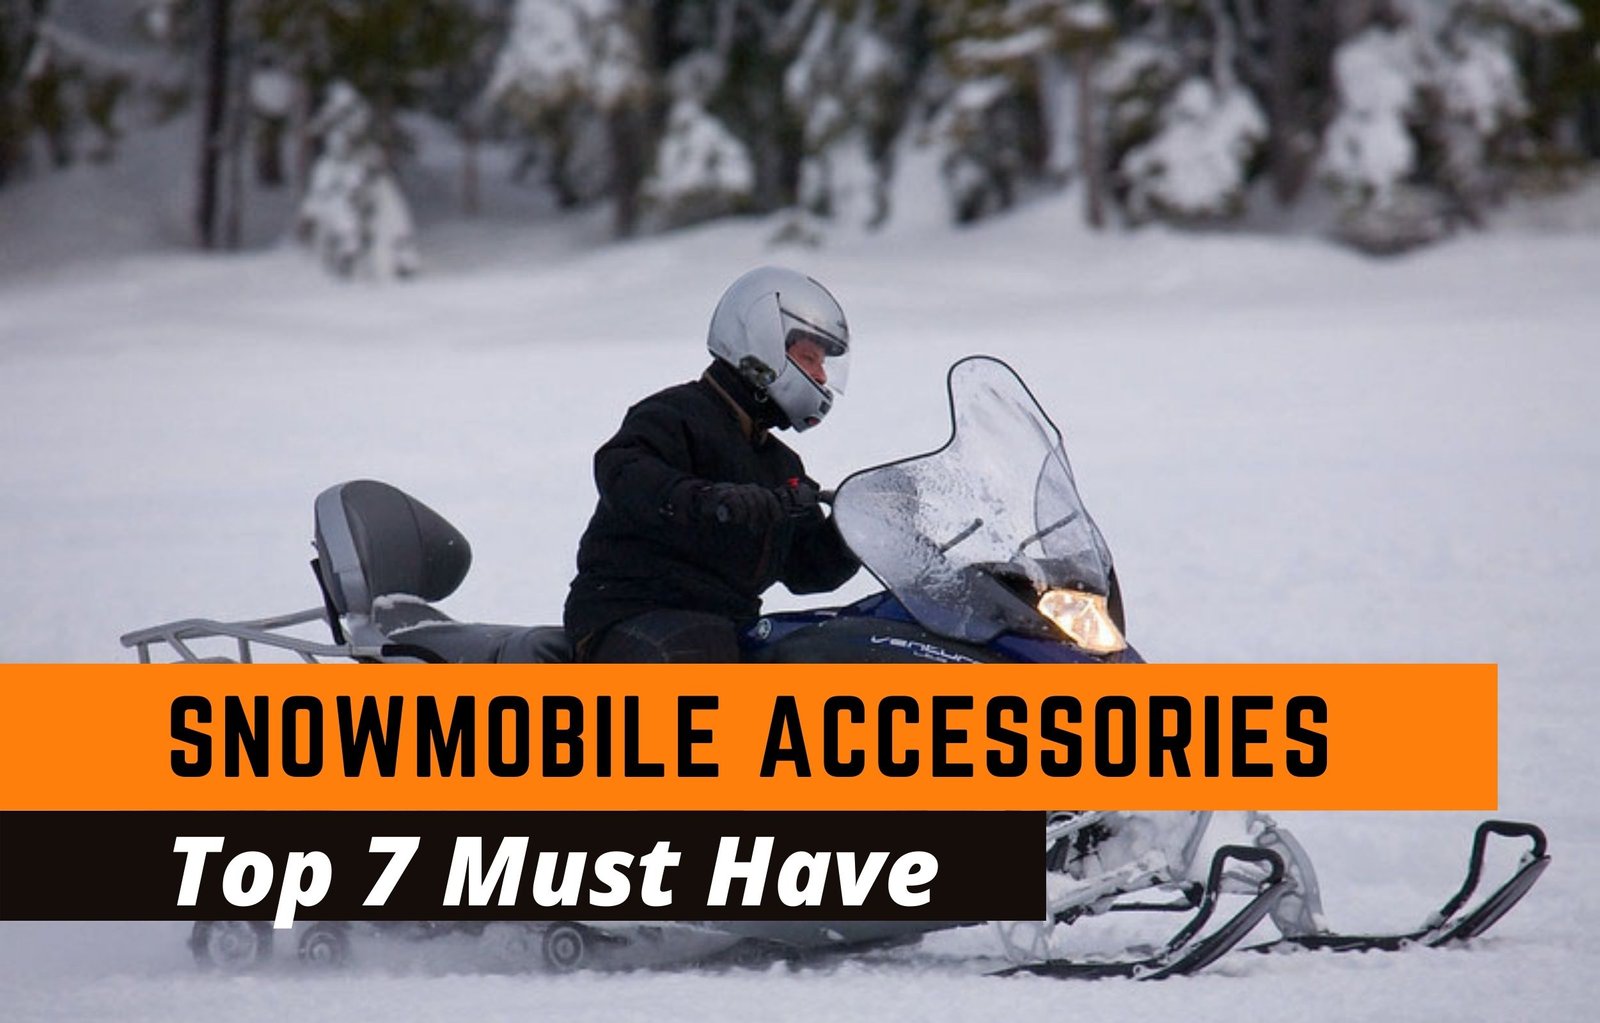 Top 7 Must Have Snowmobile Accessories 